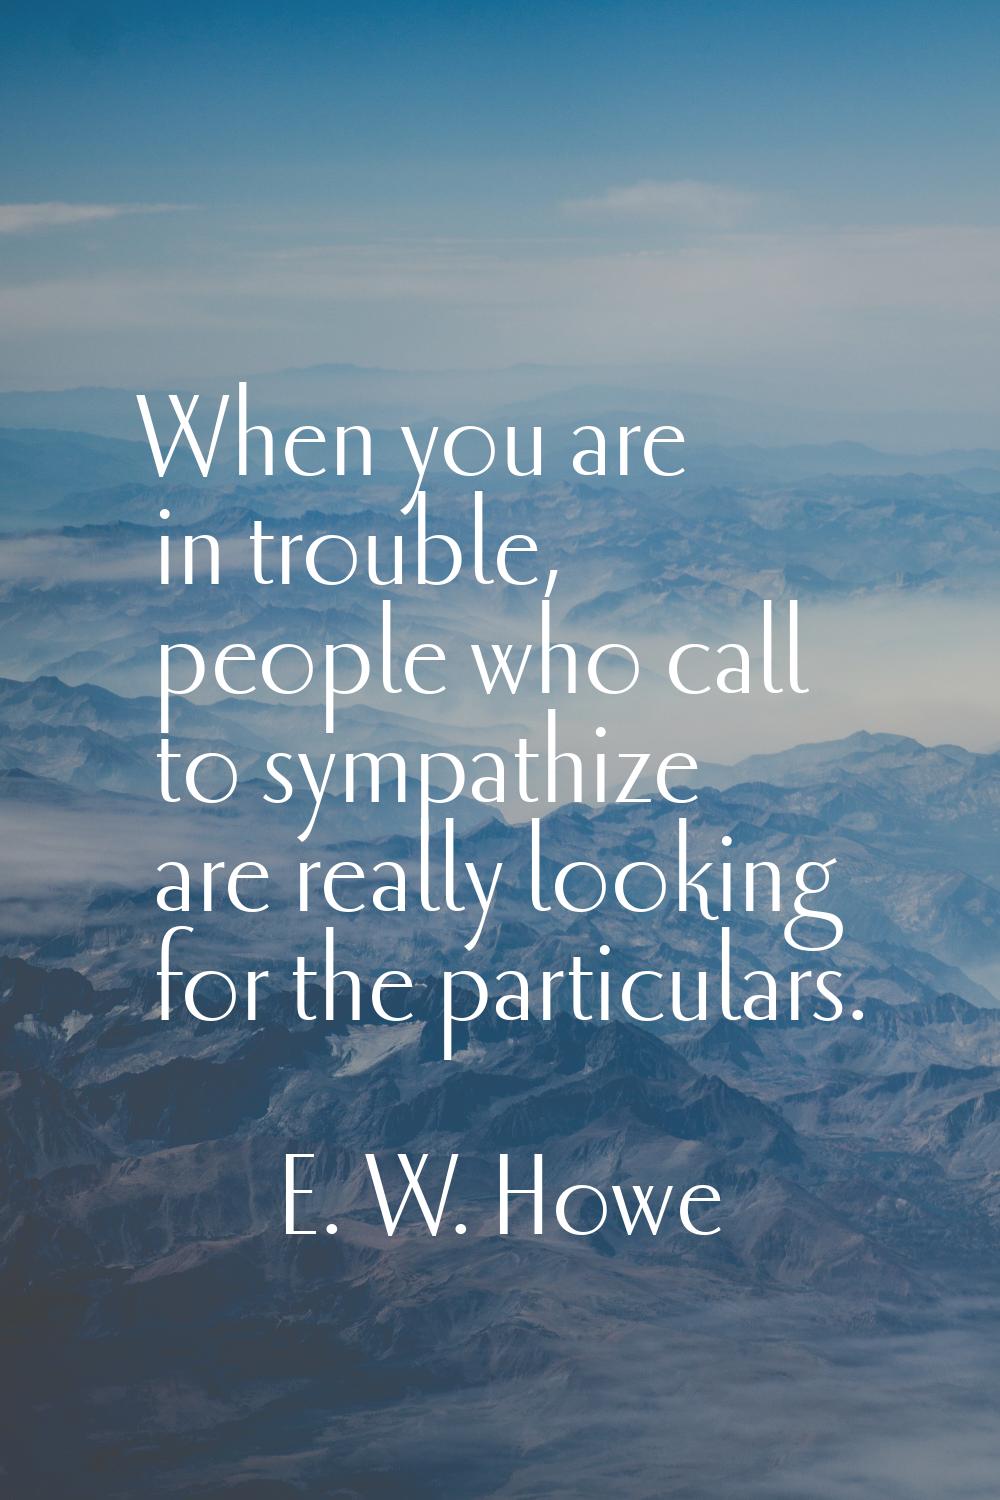 When you are in trouble, people who call to sympathize are really looking for the particulars.